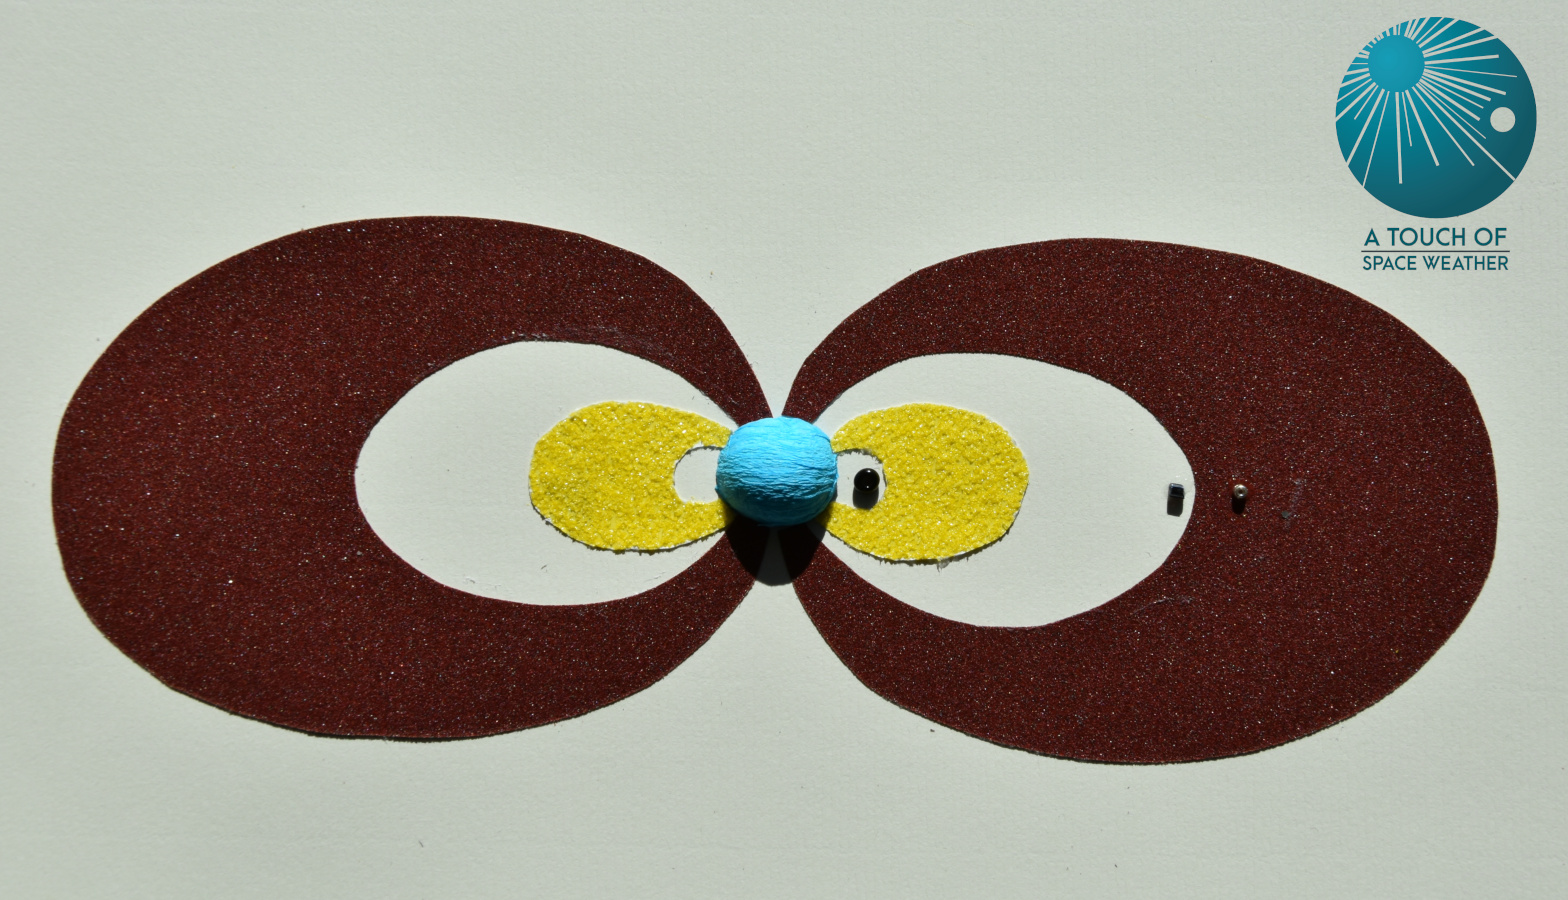 Small blue ball with even sized yellow and brown circles radiating from the centre